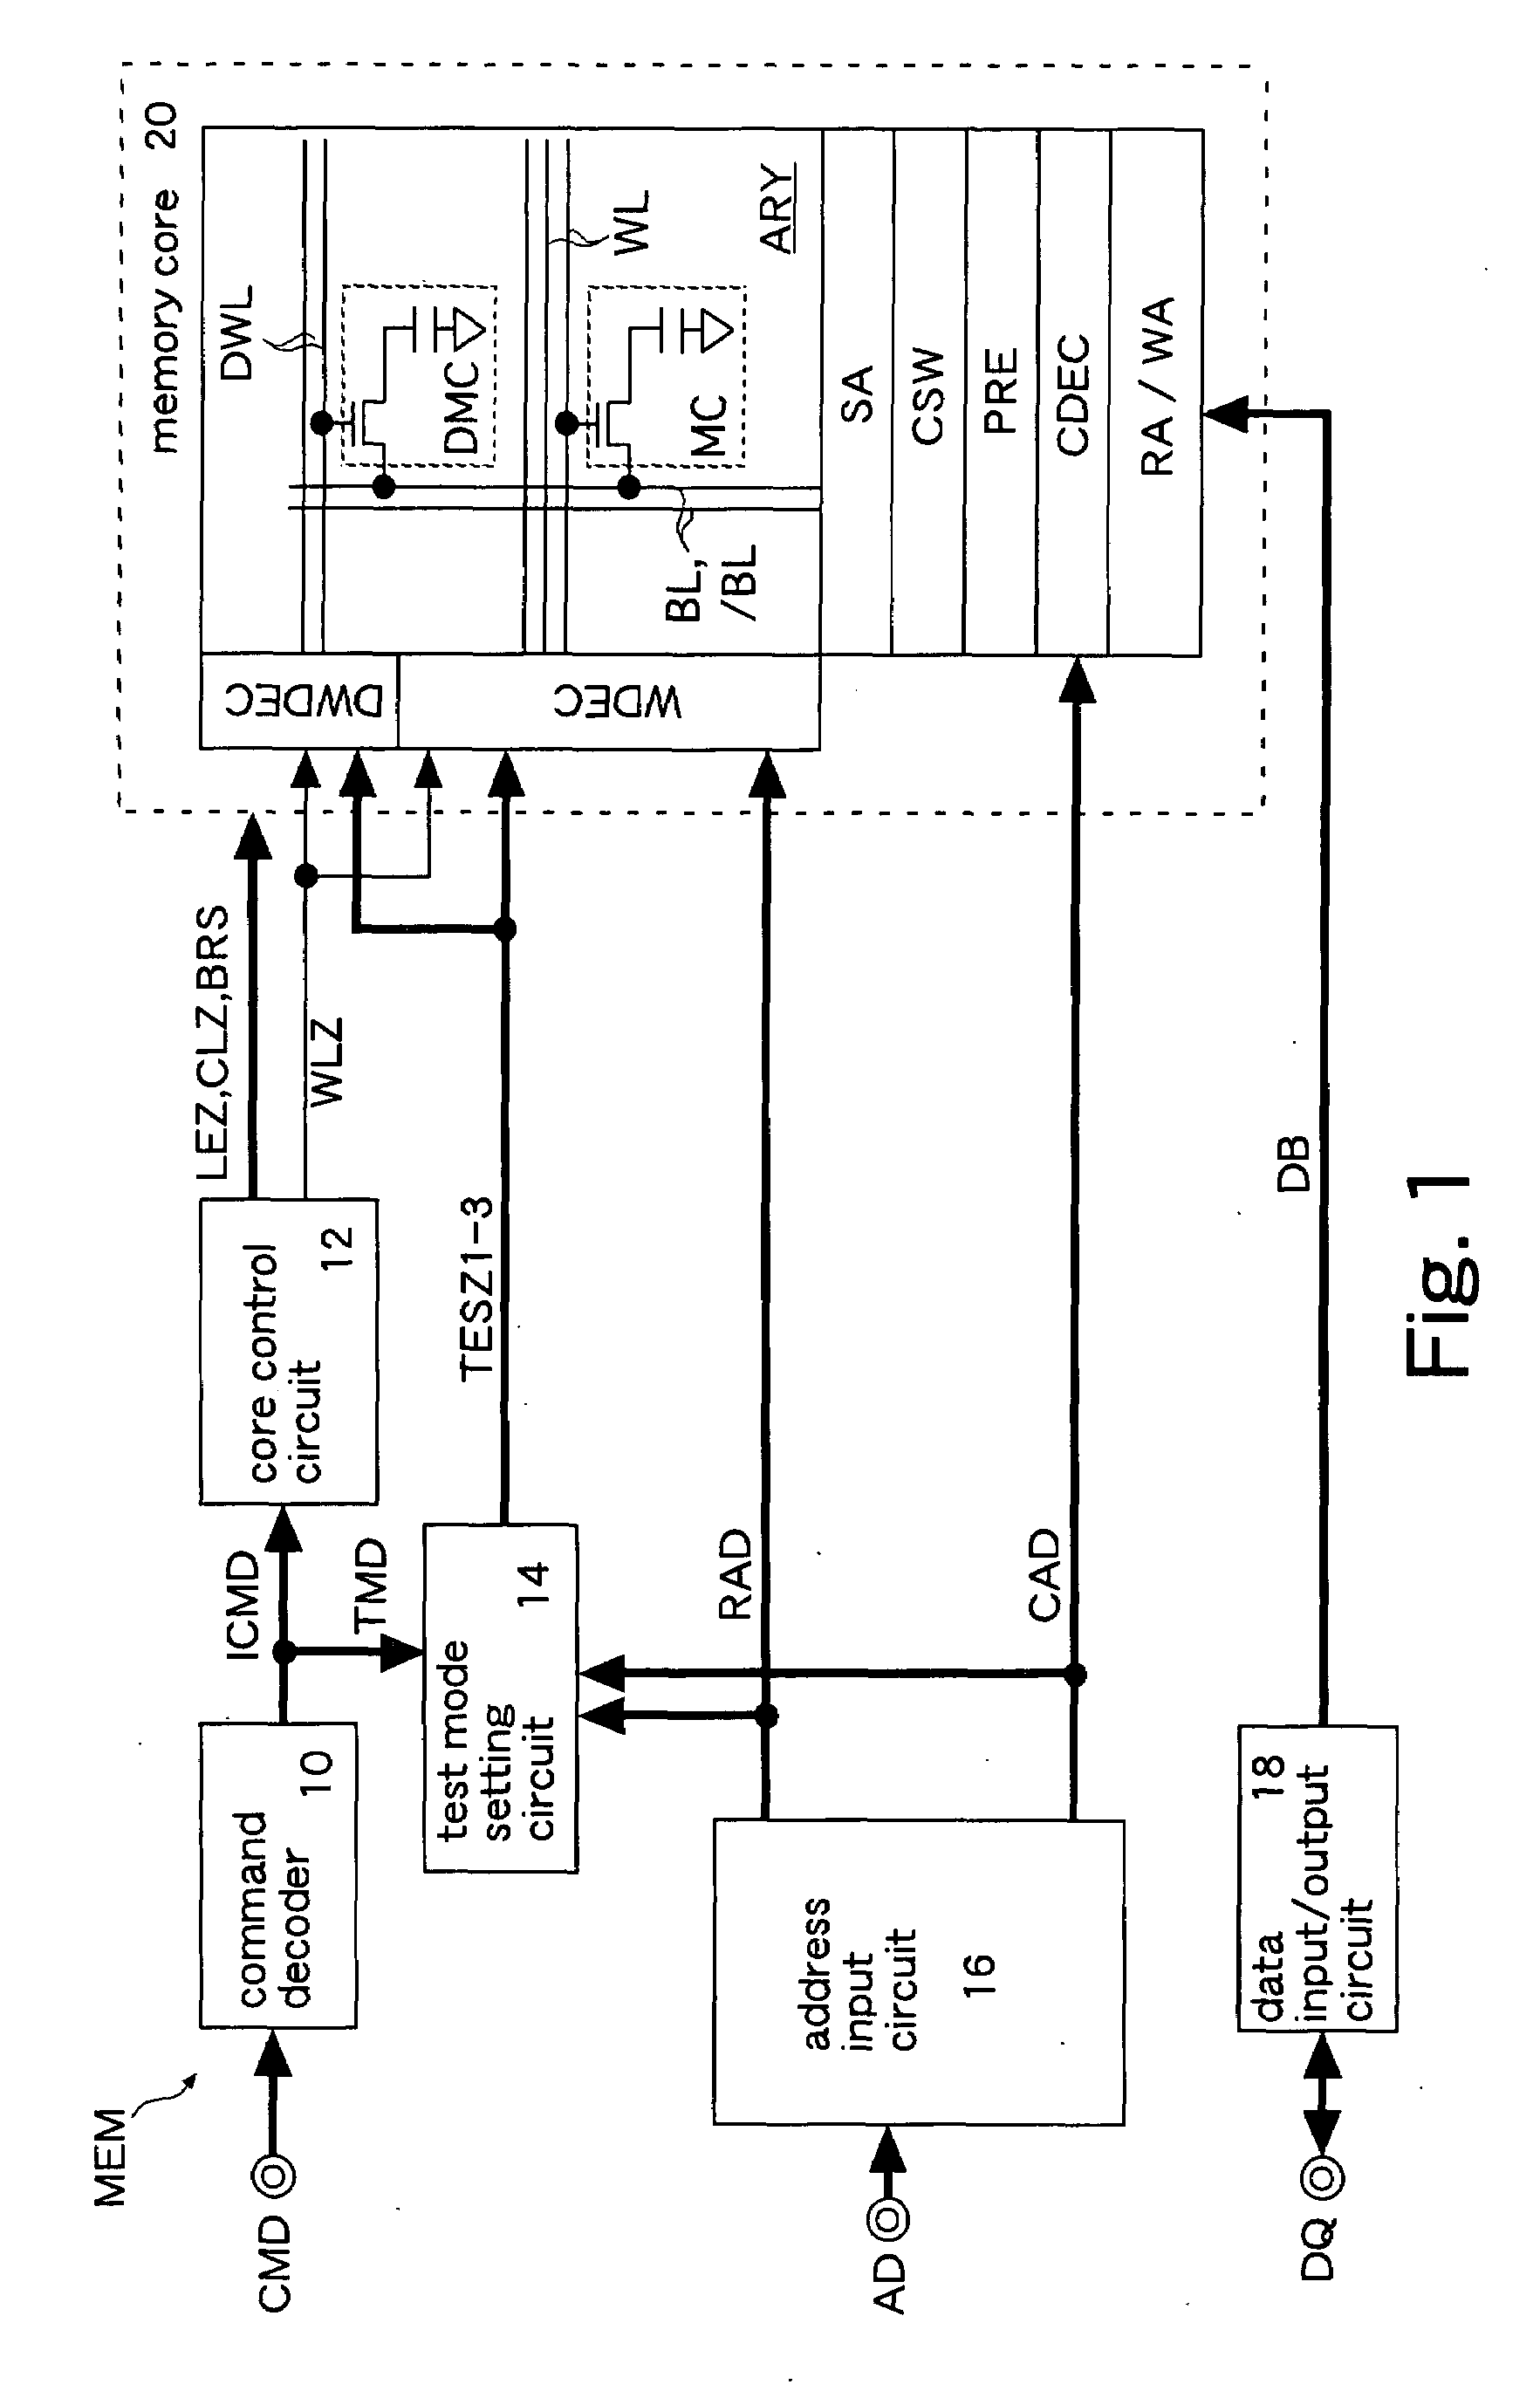 Semiconductor memory and system